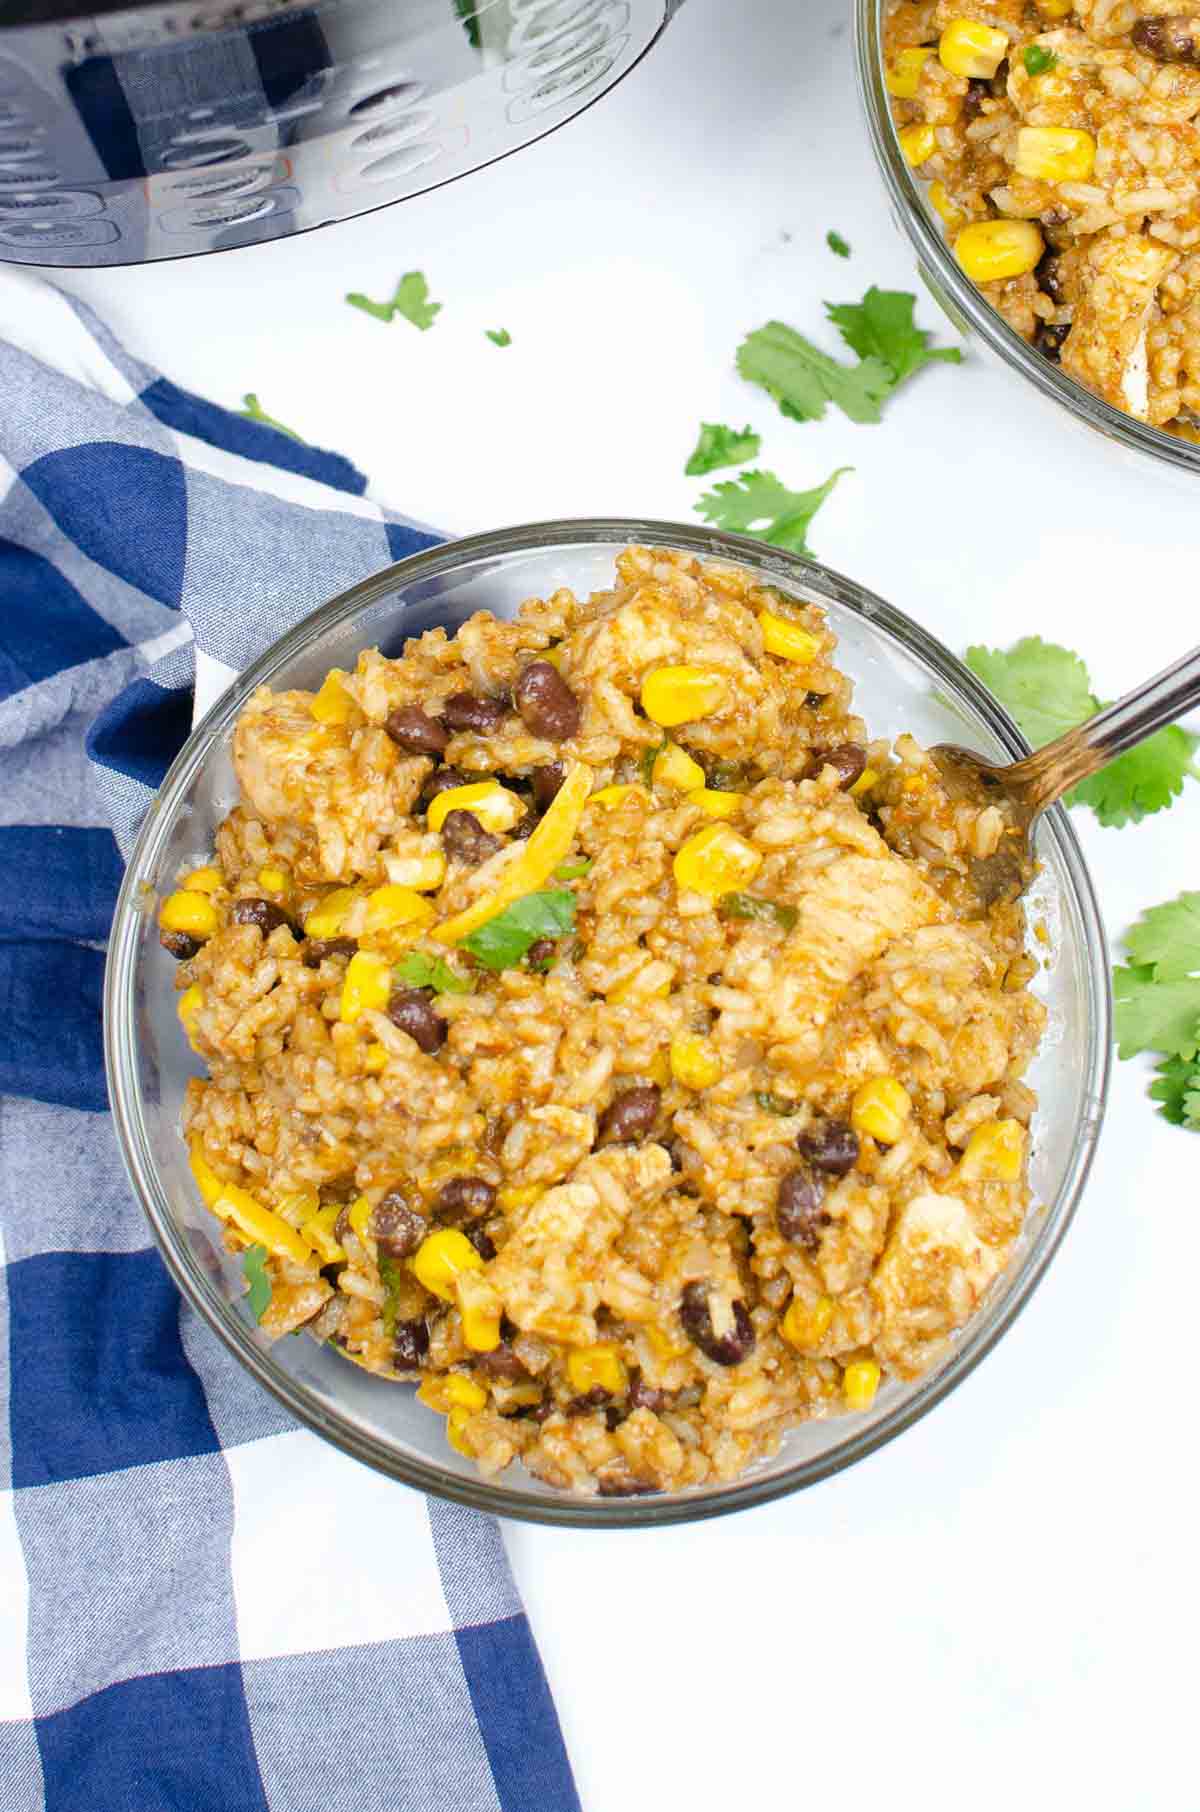 Rice and chicken with beans and corn in a bowl.